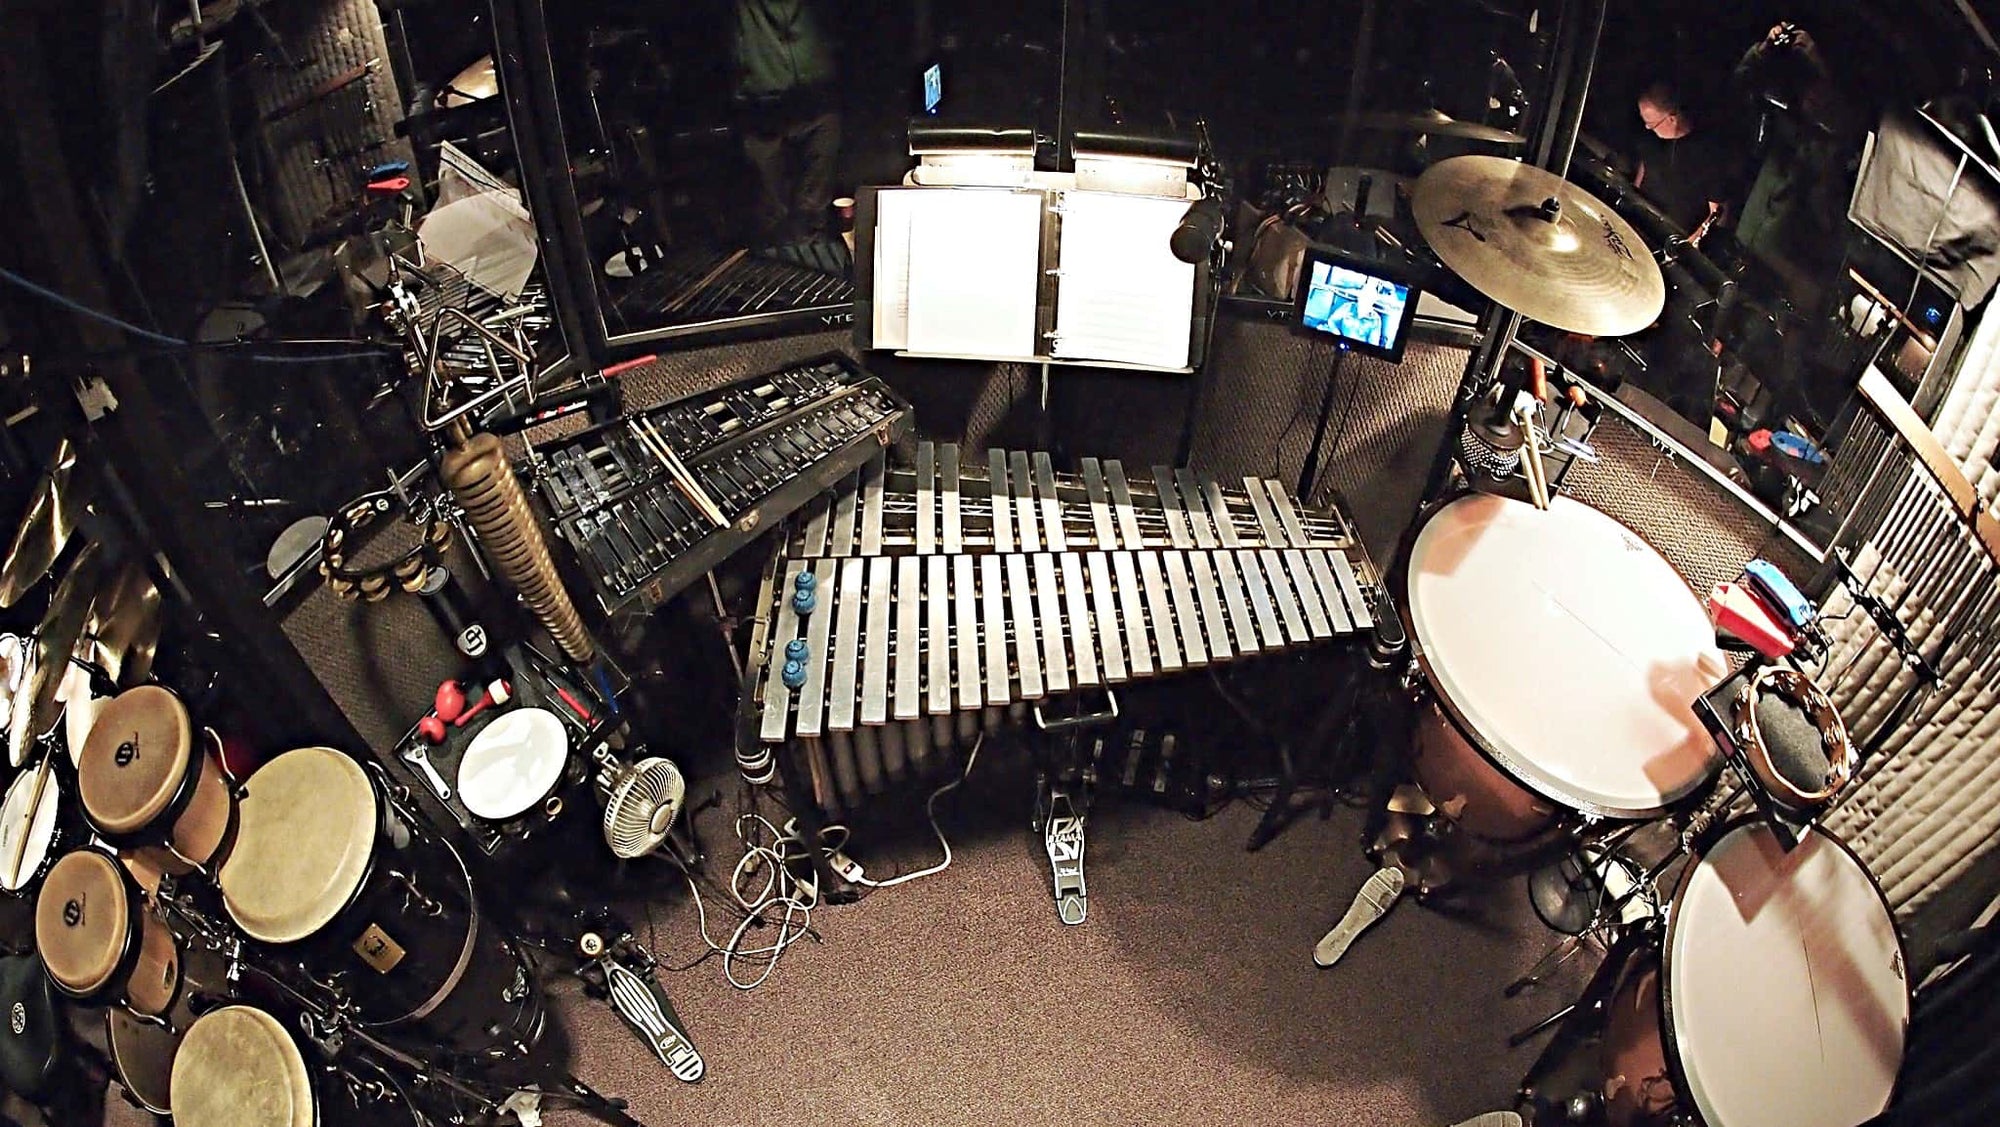 Alec Wilmart’s percussion setup for Dreamgirls at the Village Theater in Seattle, Washington.